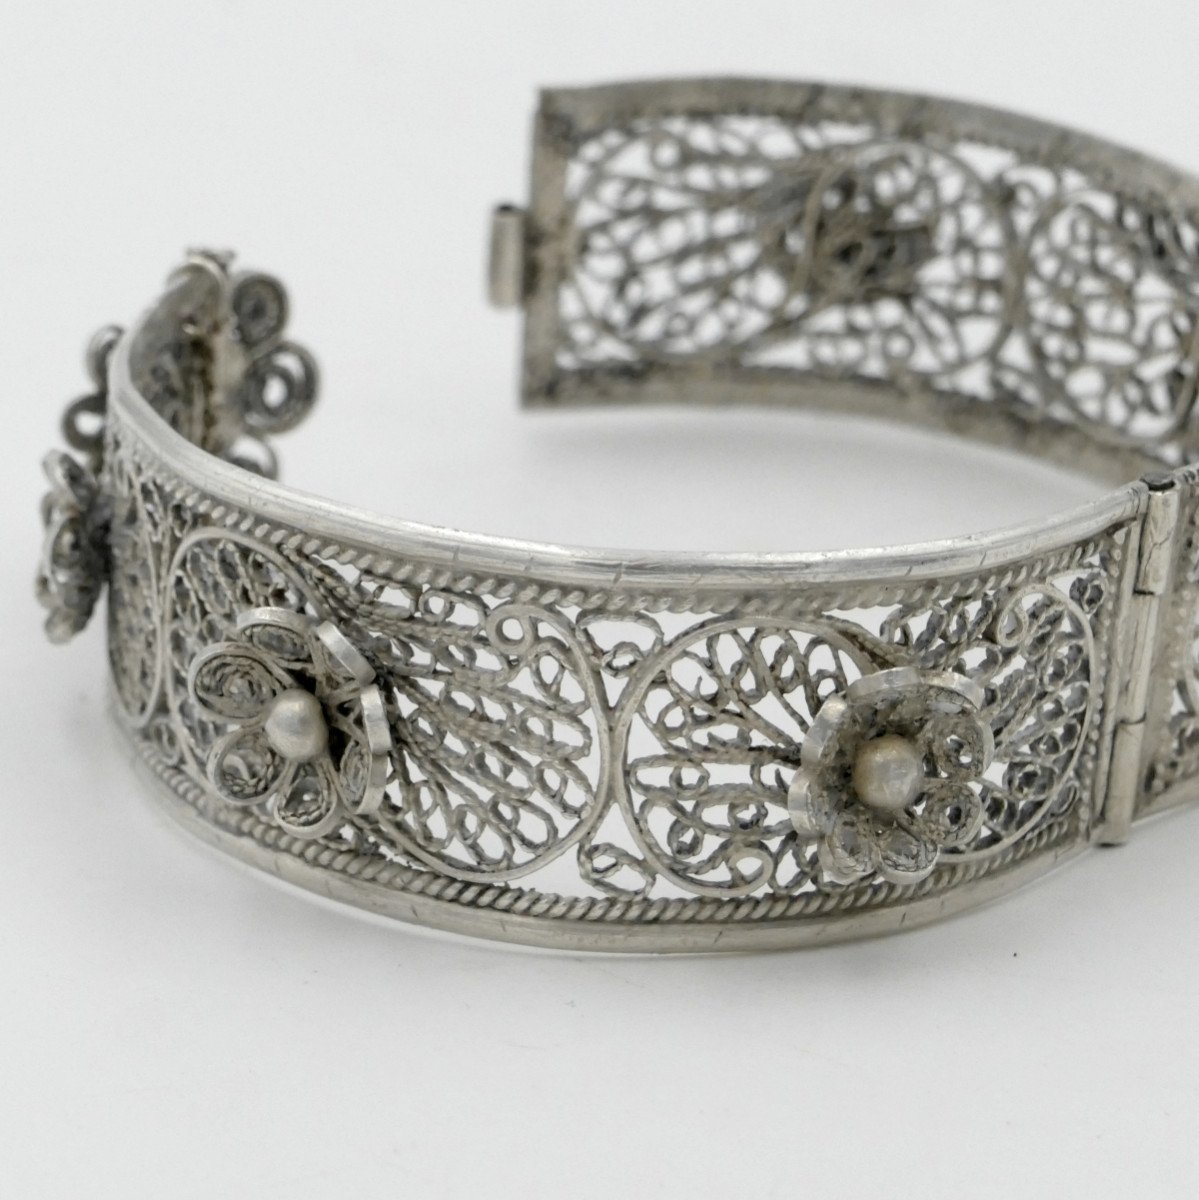 Cuff Bracelet With Flower Decor, Sterling Silver, Tunisia, 20th Century.-photo-2